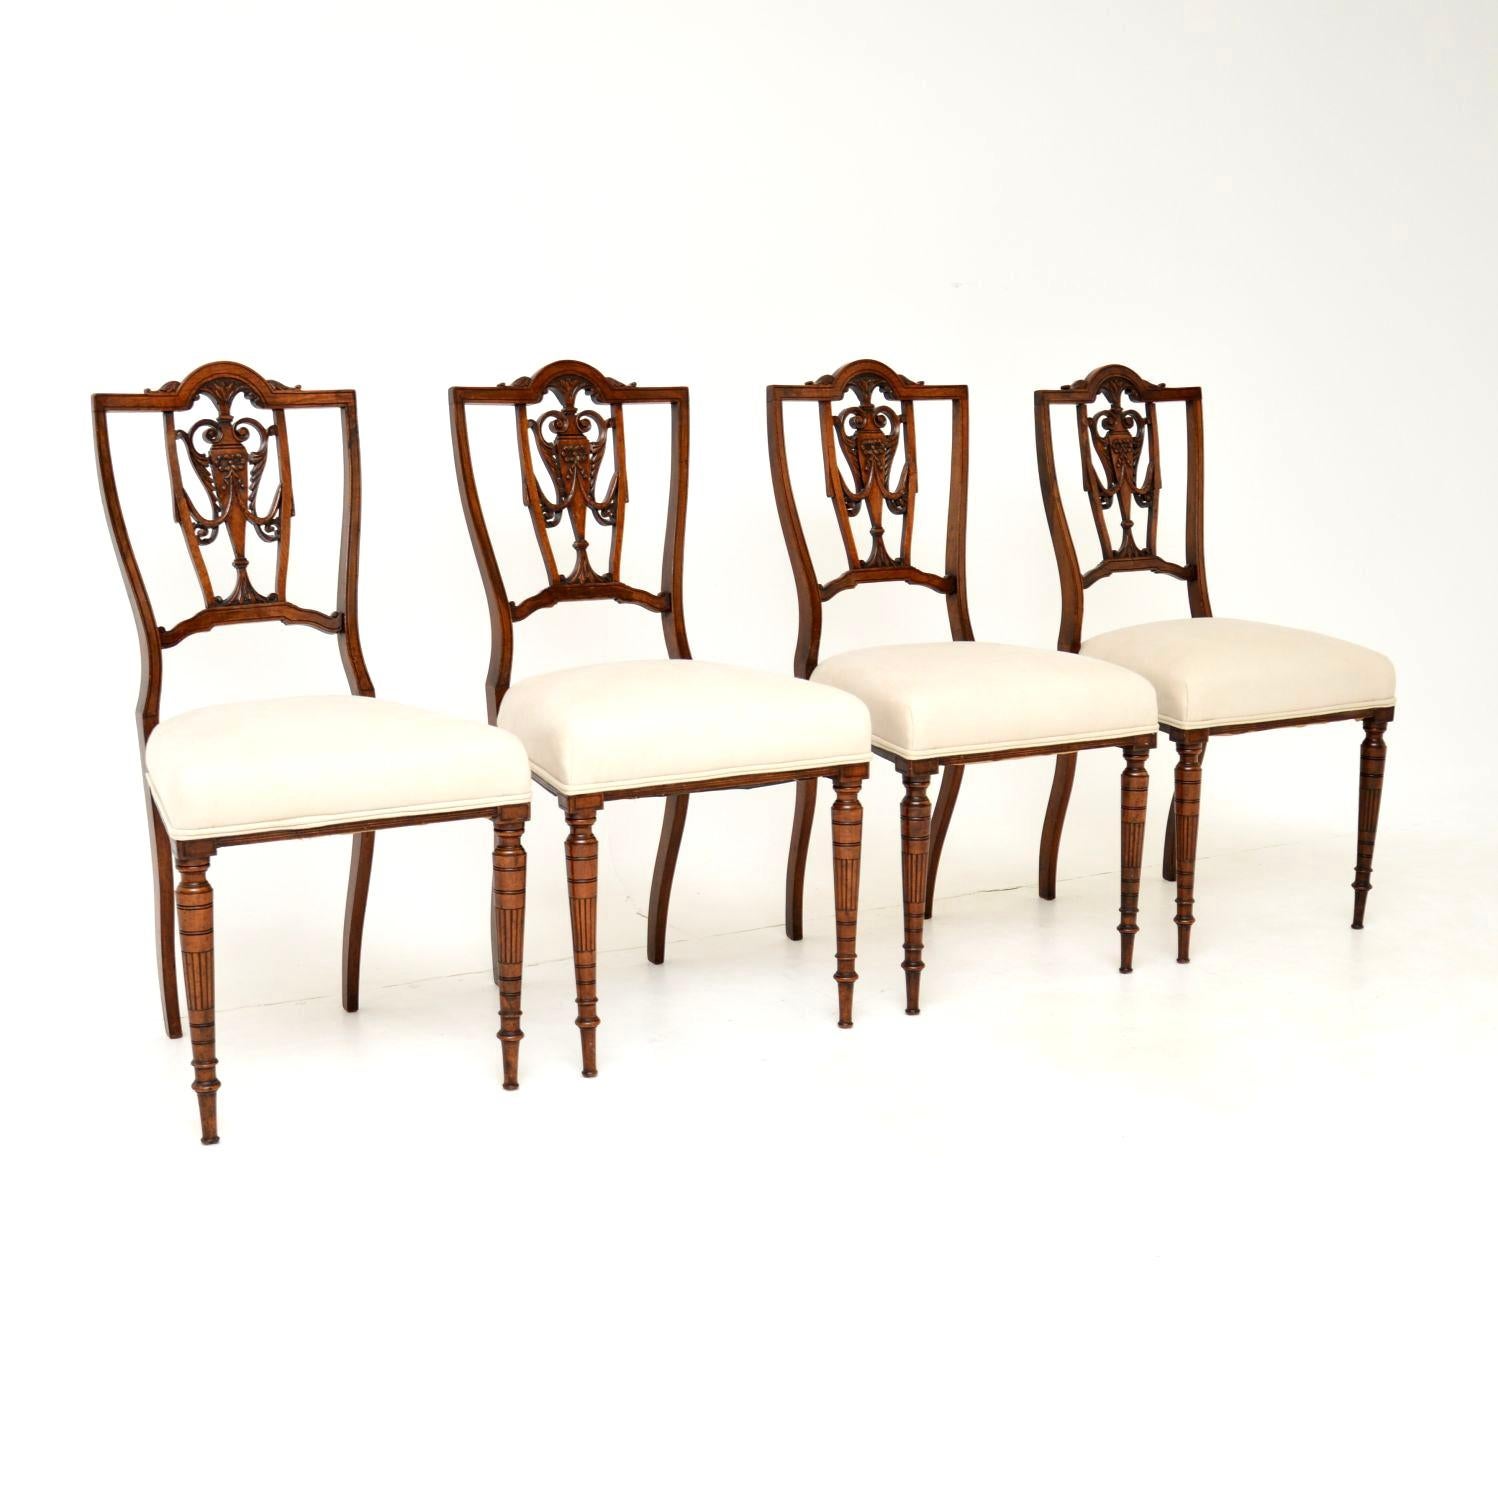 A beautiful and elegant set of four antique Victorian dining chairs. These were made in England, they date from around the 1880-1900 period.

They have a gorgeous design, with fine carving on the backs and beautifully turned legs. The quality is